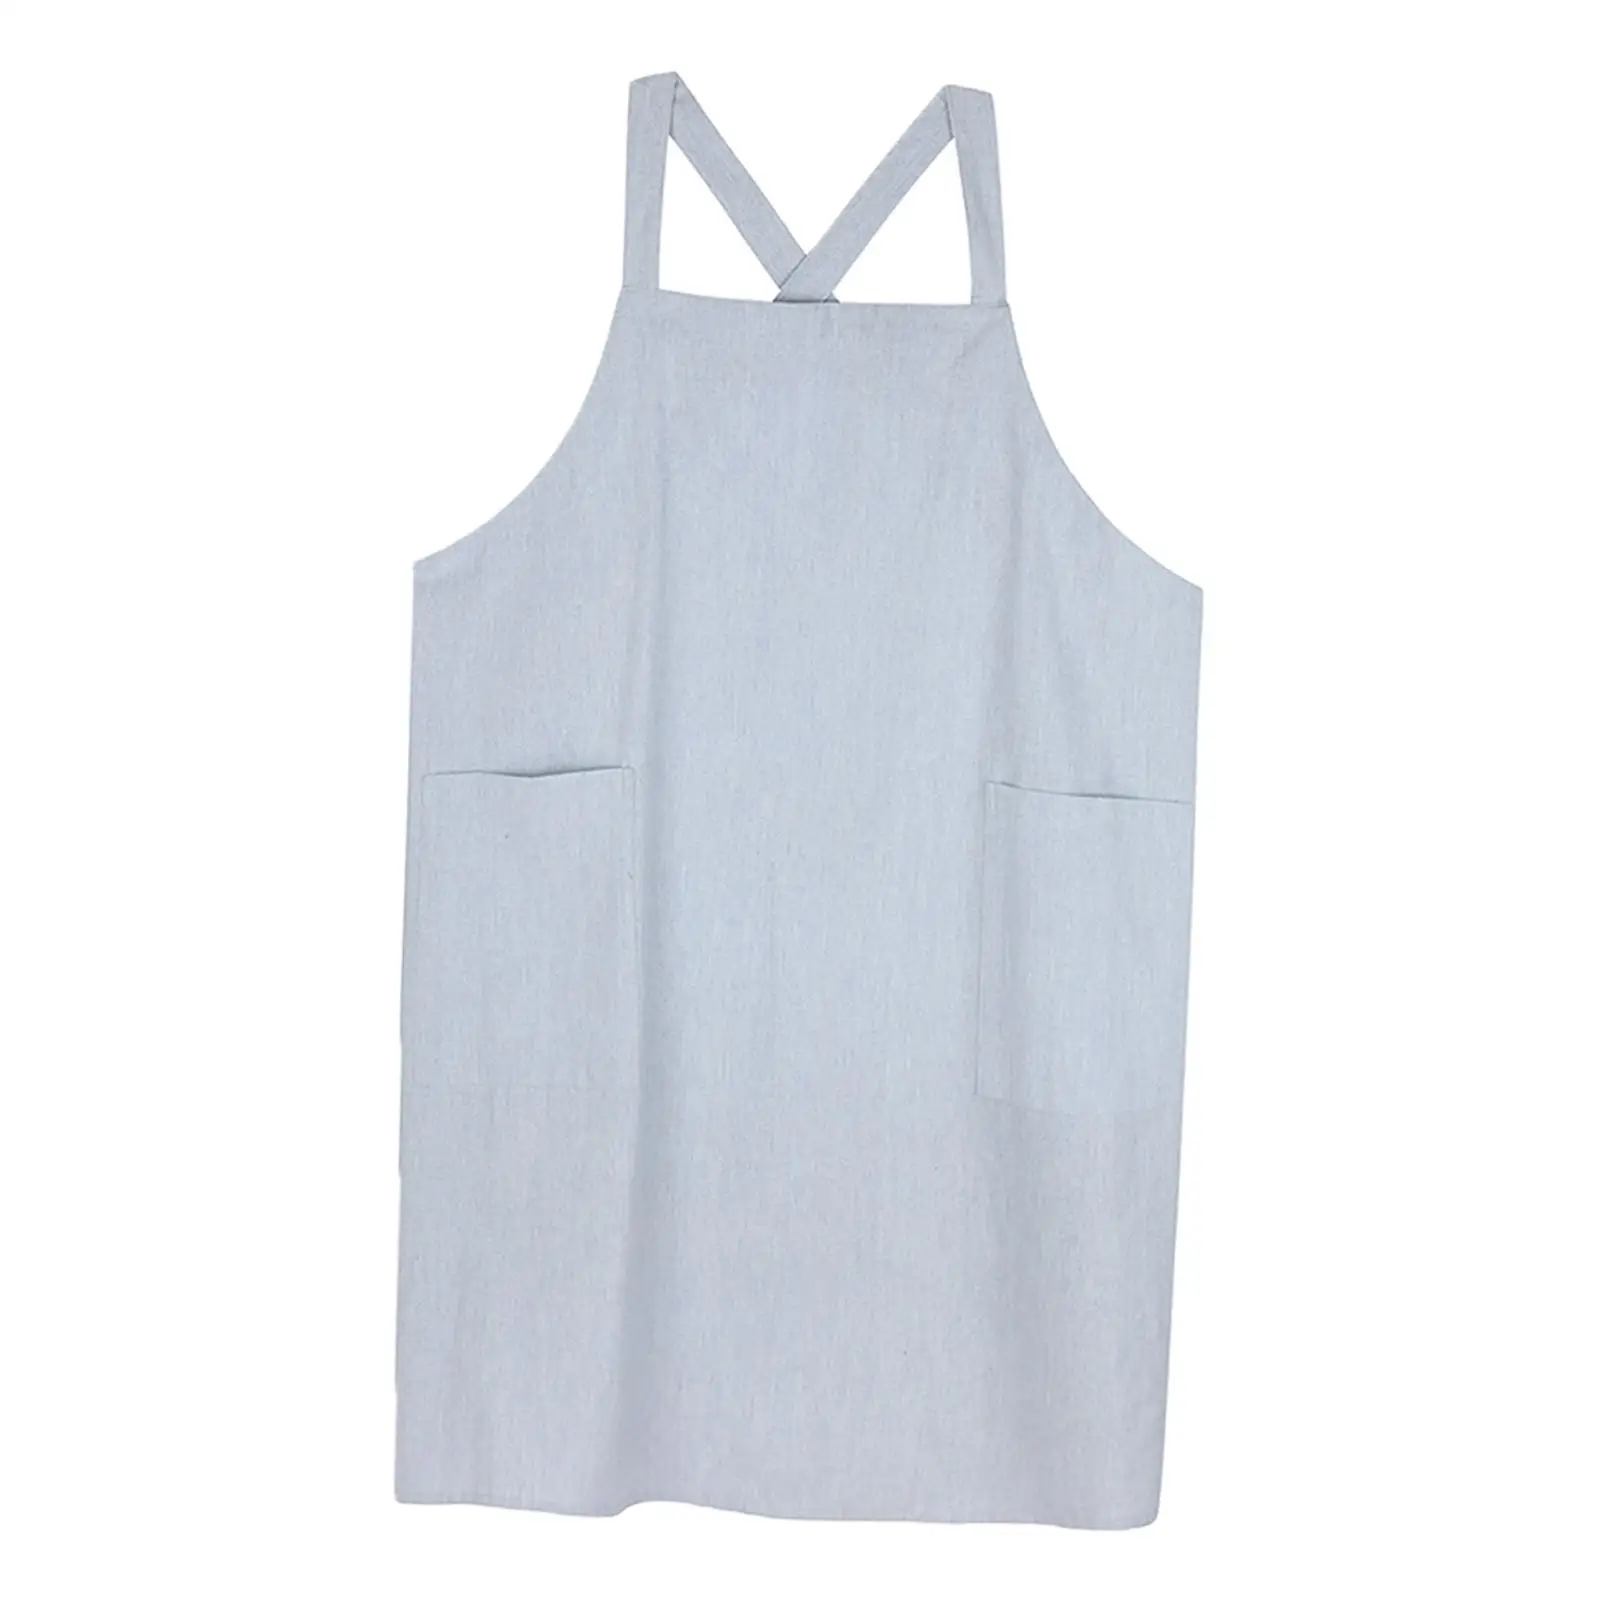 Cotton Catering Apron with Pockets Waterproof Barista Apron Professional Apron Bib for Restaurant Hotel Woman